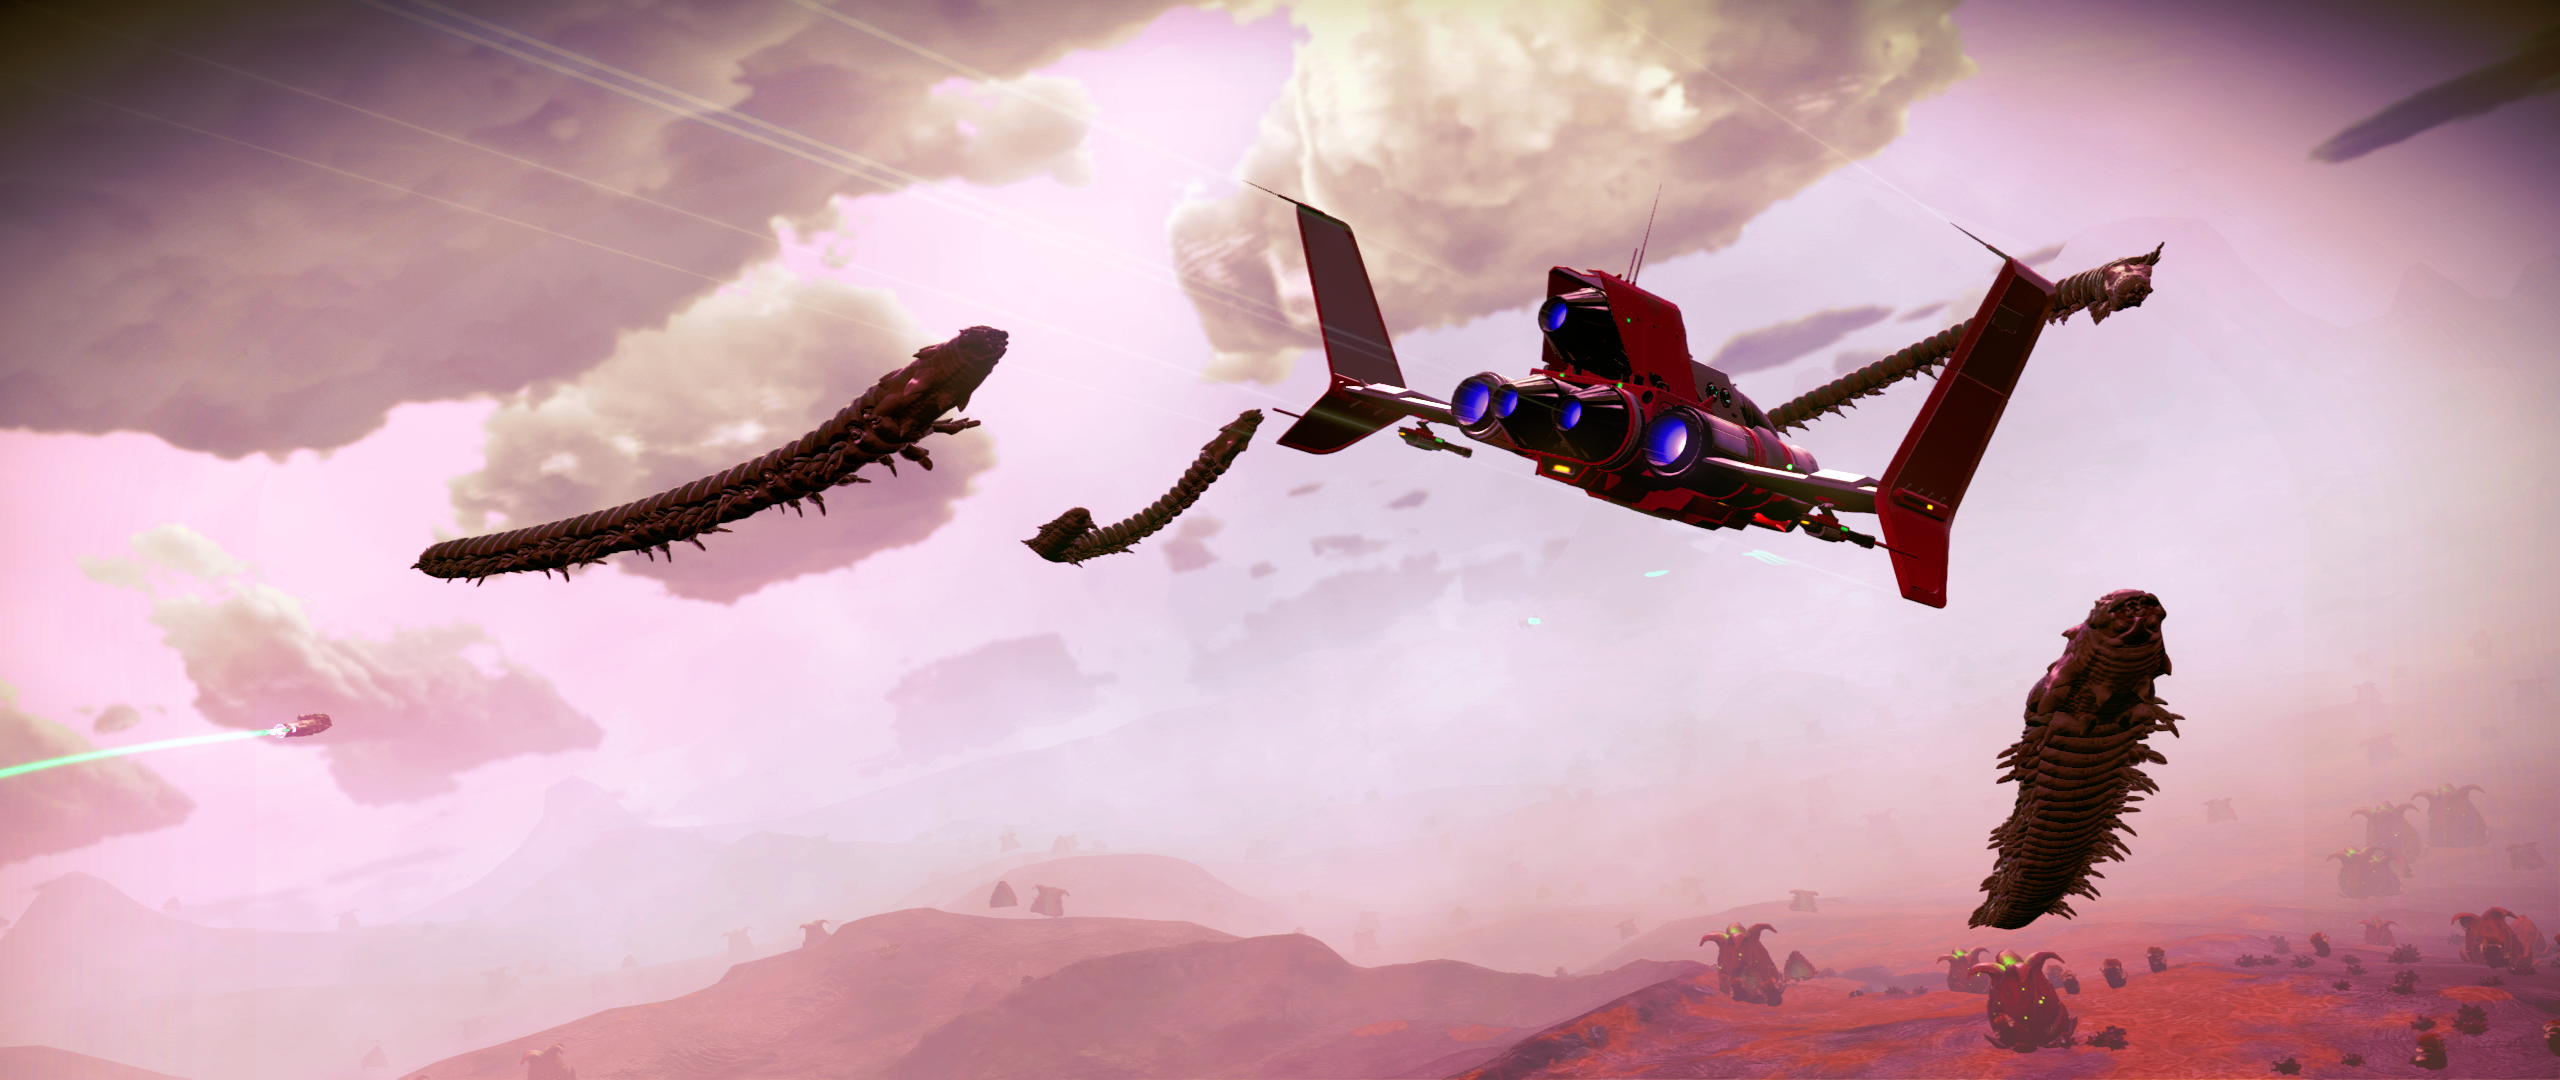 No Mans Sky Space Worm Video Games CGi Clouds Sky Creature 2560x1080